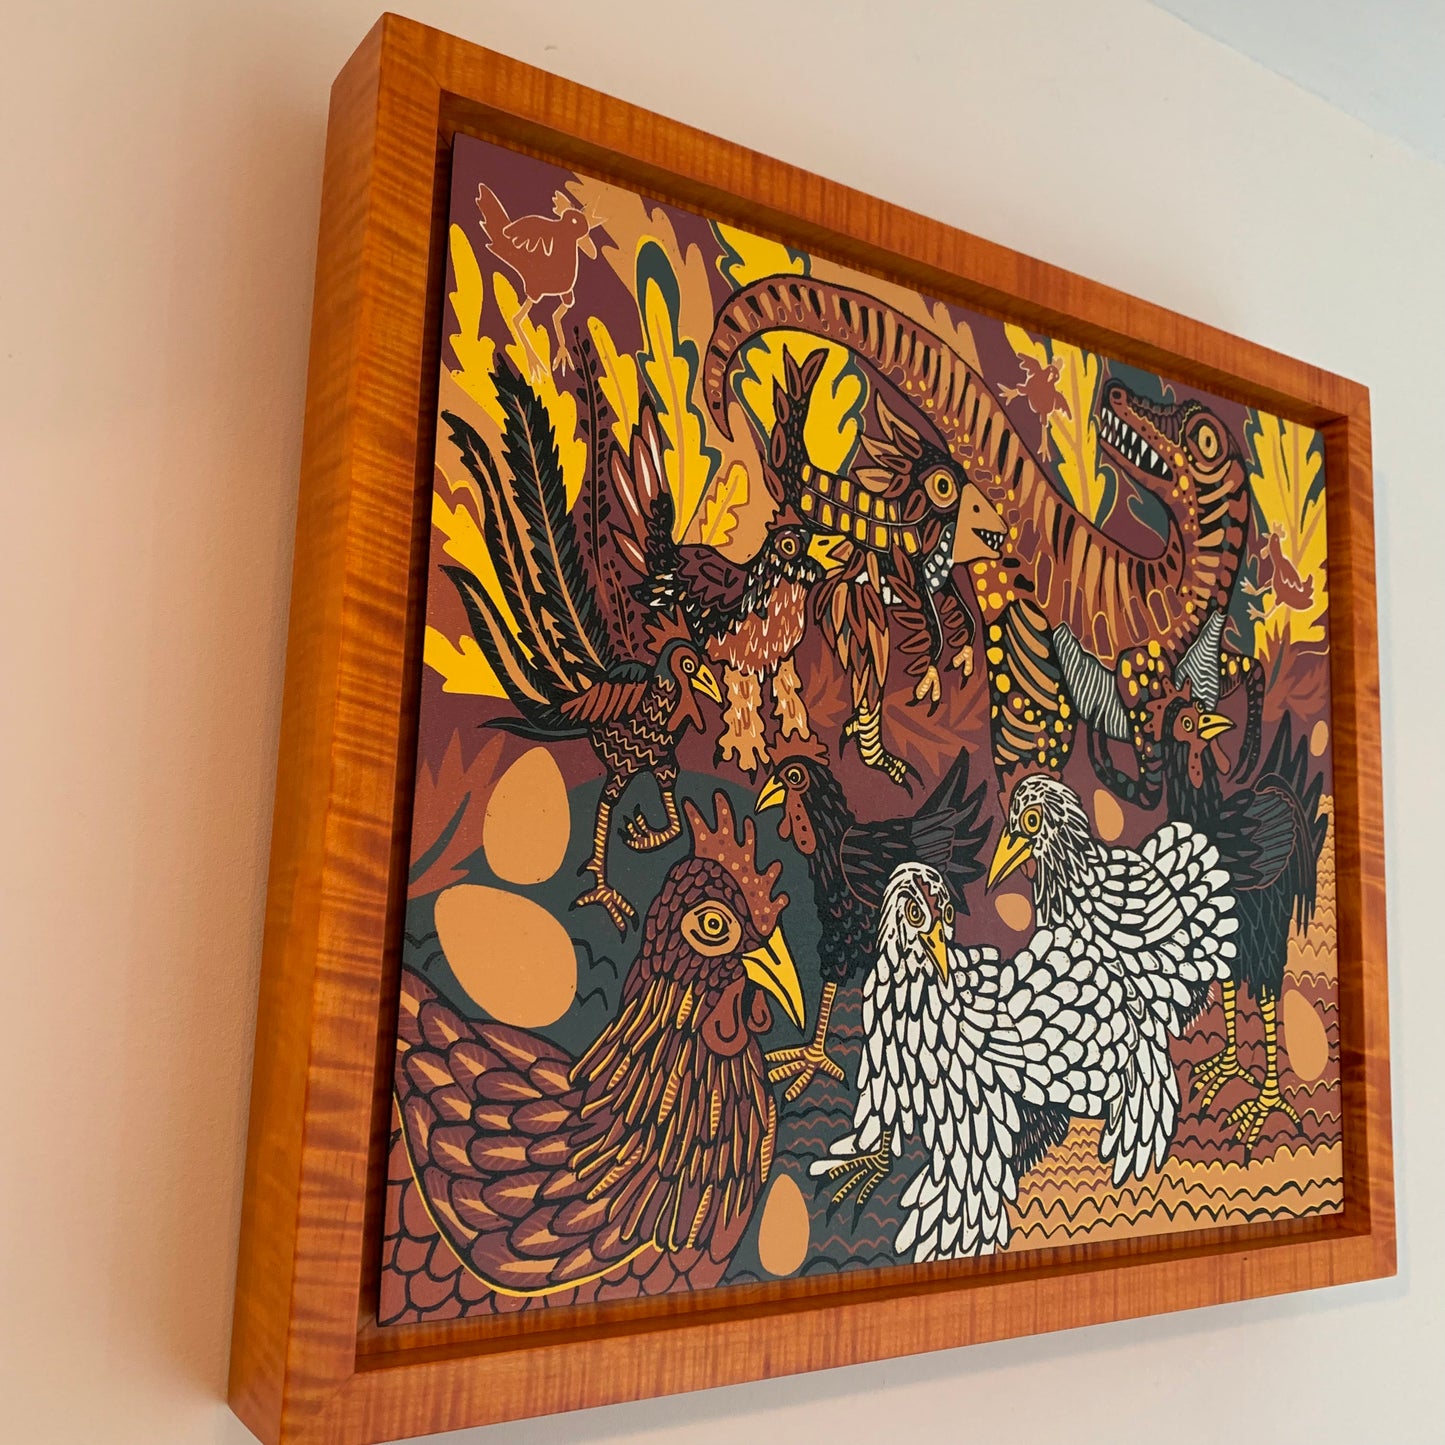 Evolution of chickens woodcut framed in orange curly maple